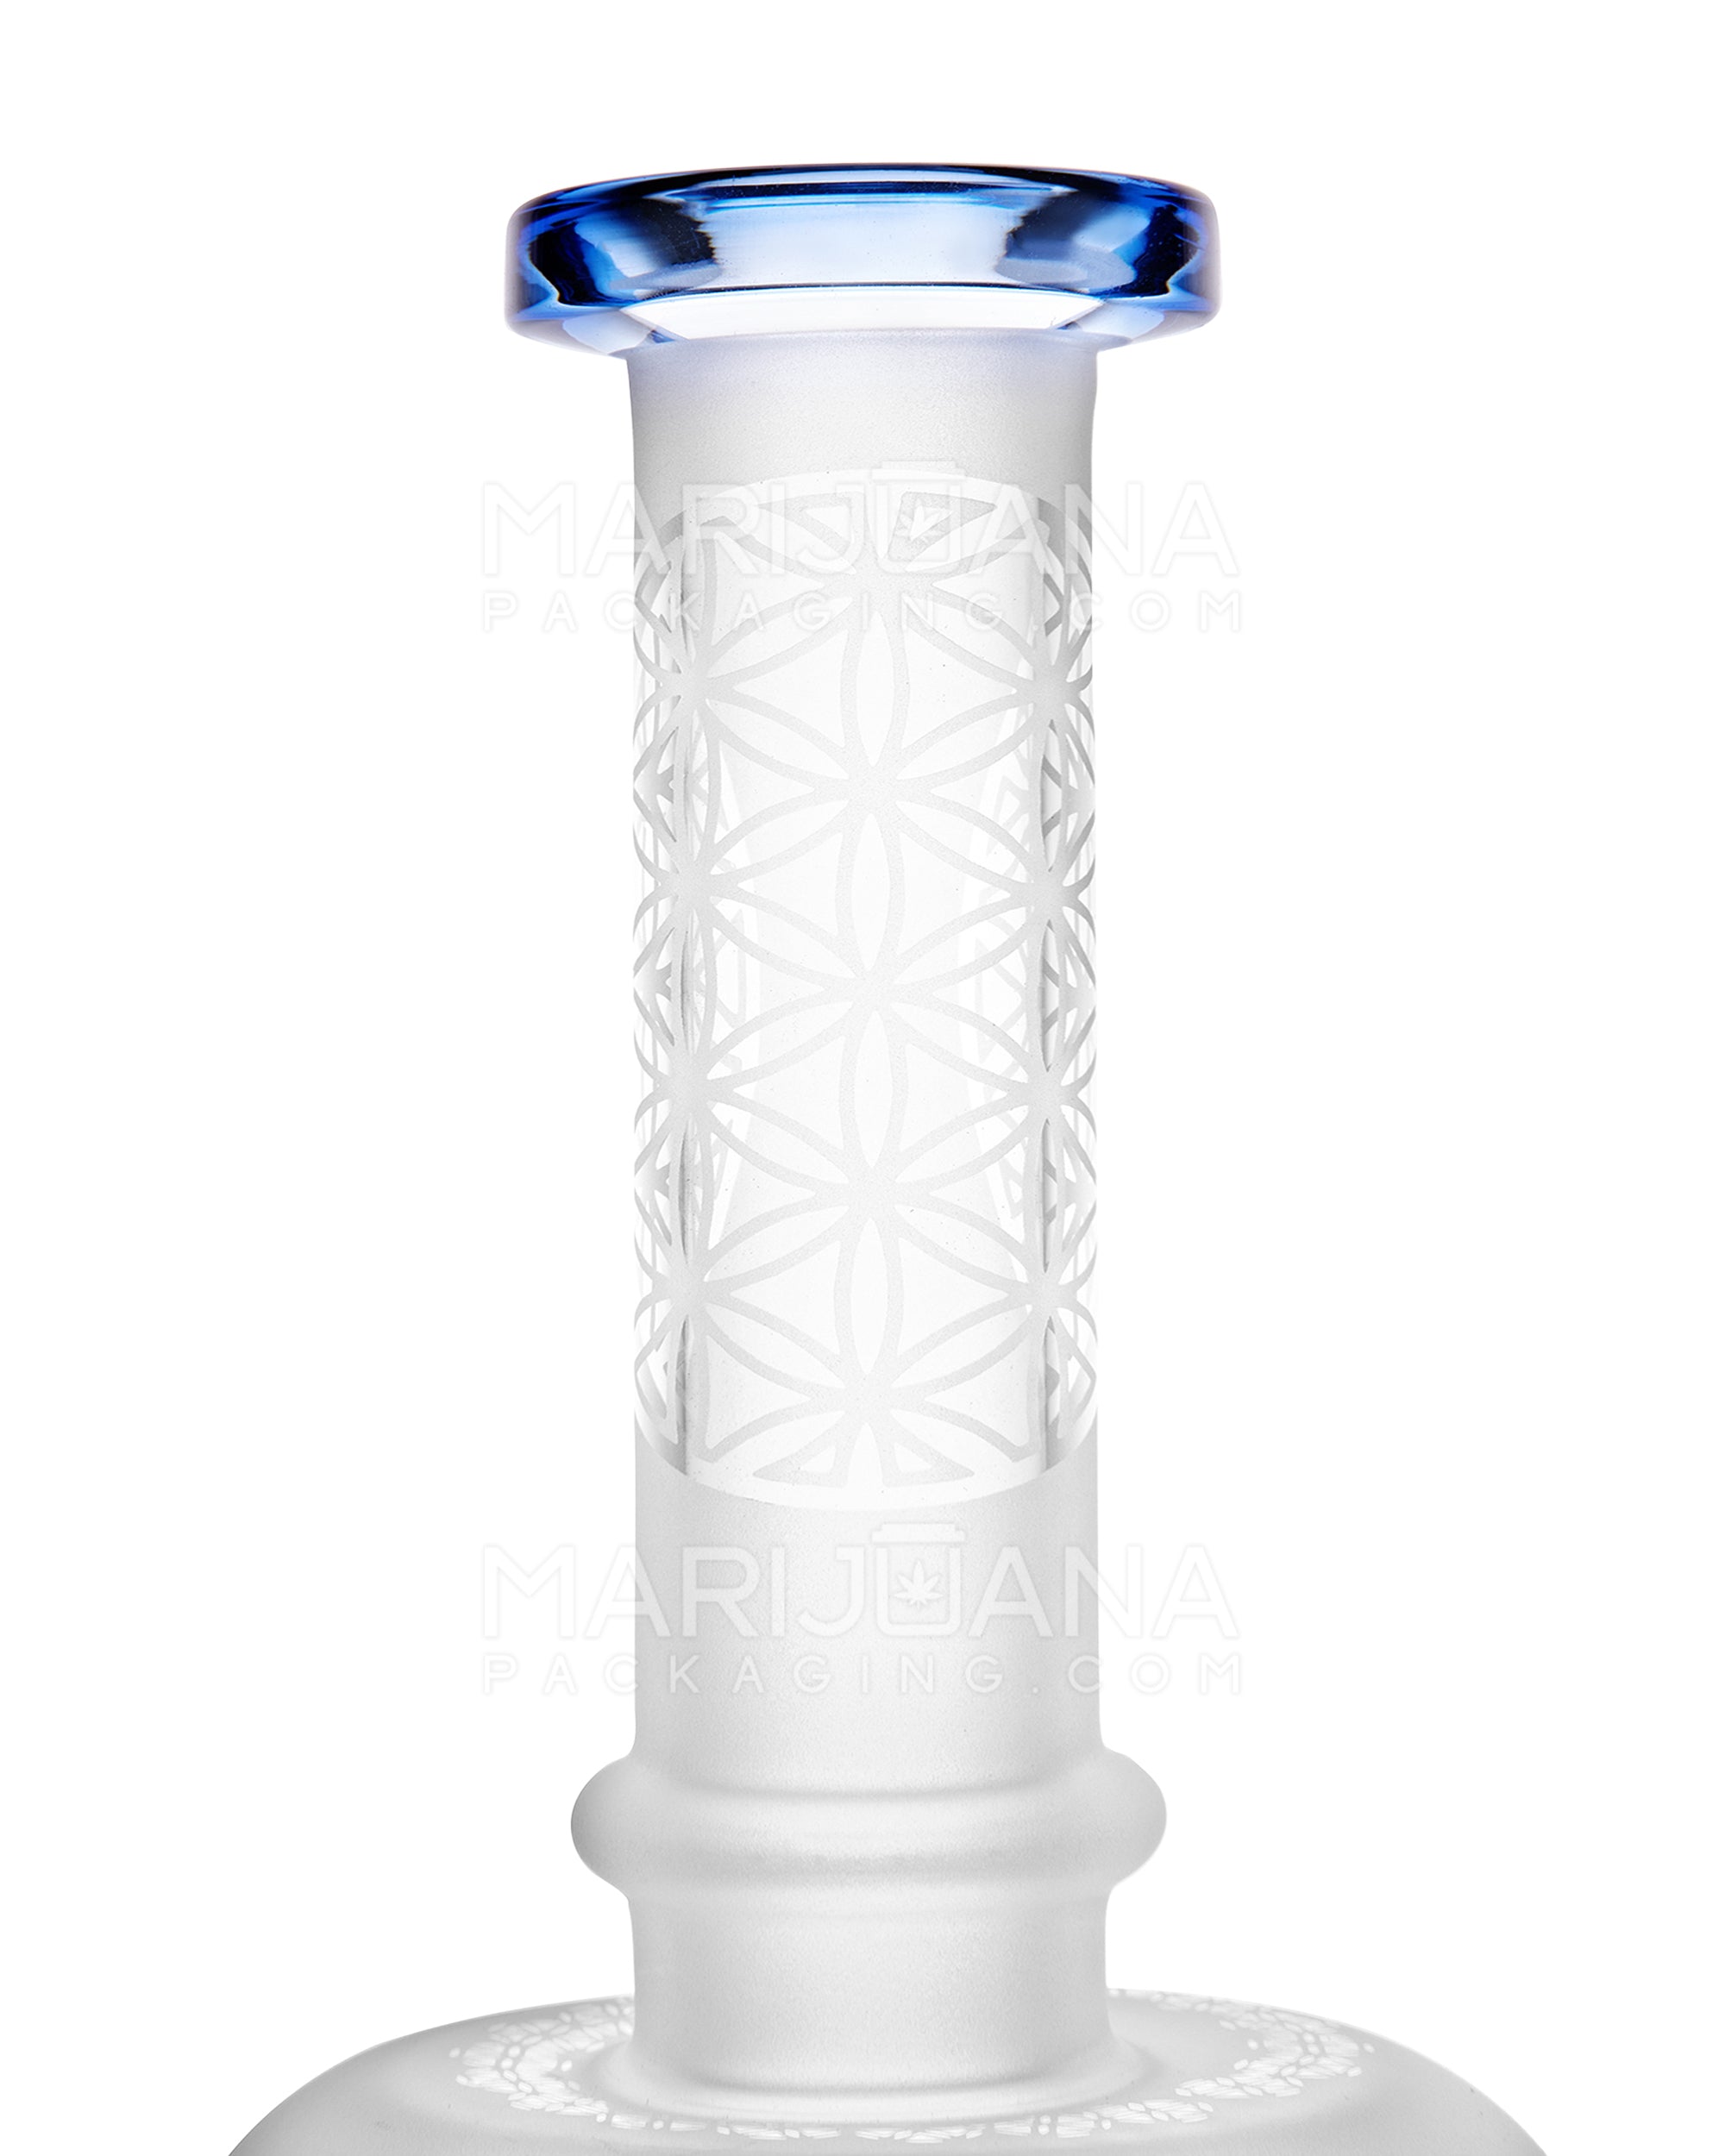 USA Glass | Straight Neck Matrix Perc Sandblasted Glass Water Pipe w/ Implosion Marbles | 11in Tall - 14mm Bowl - Blue - 4